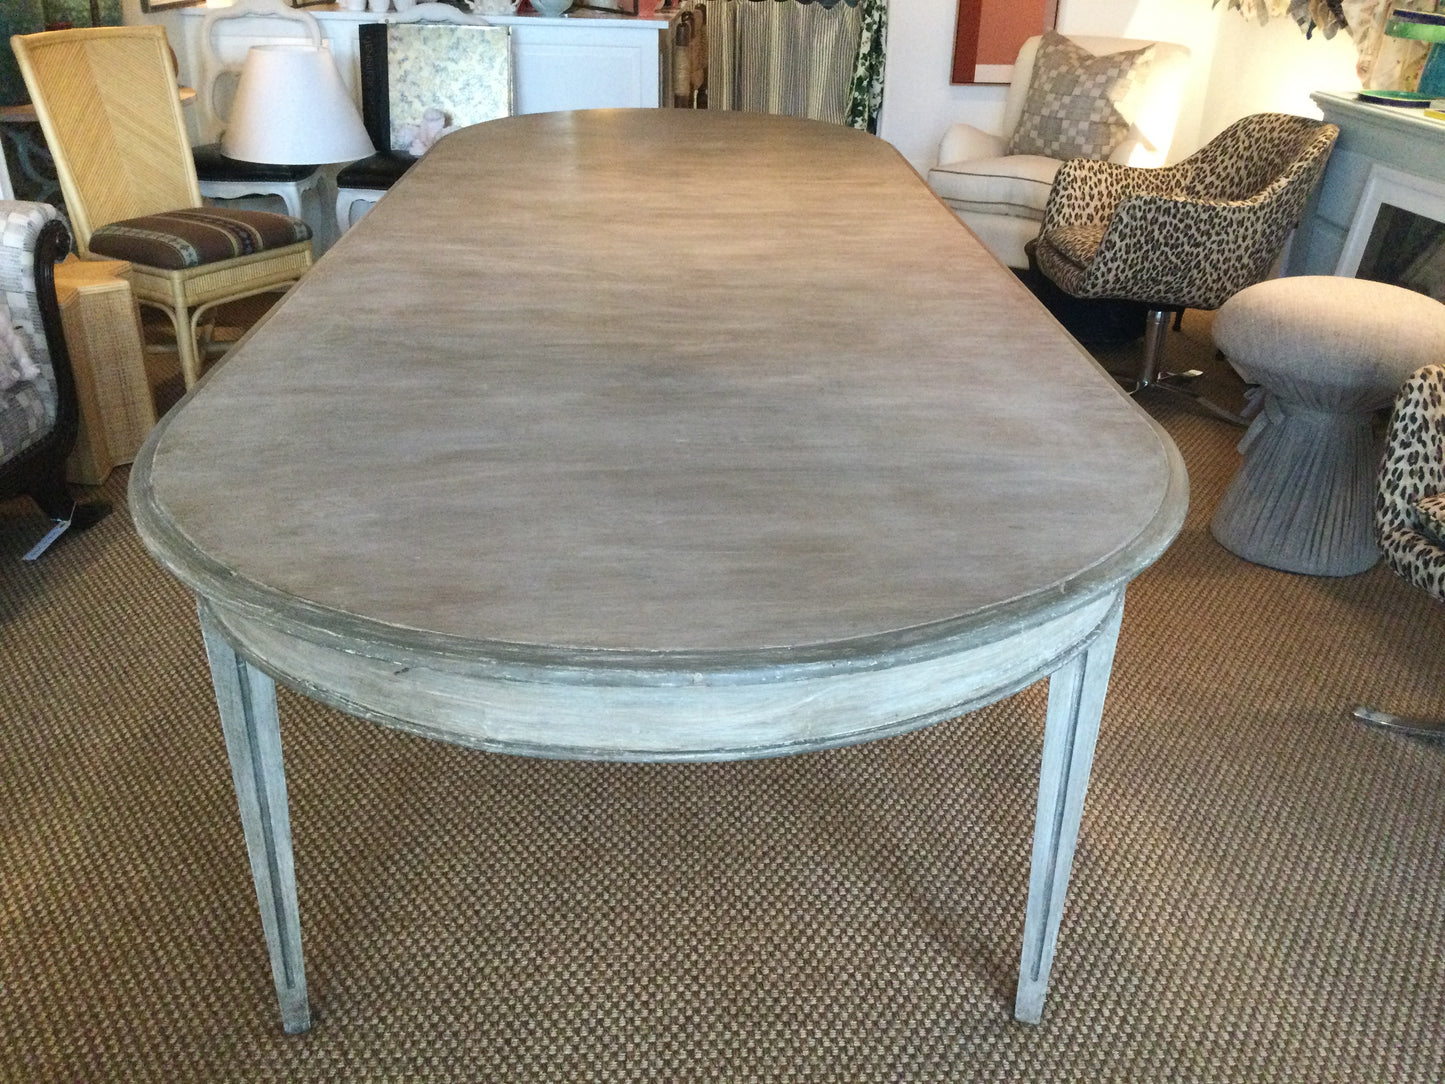 Dining Table - SALE 30% off marked price